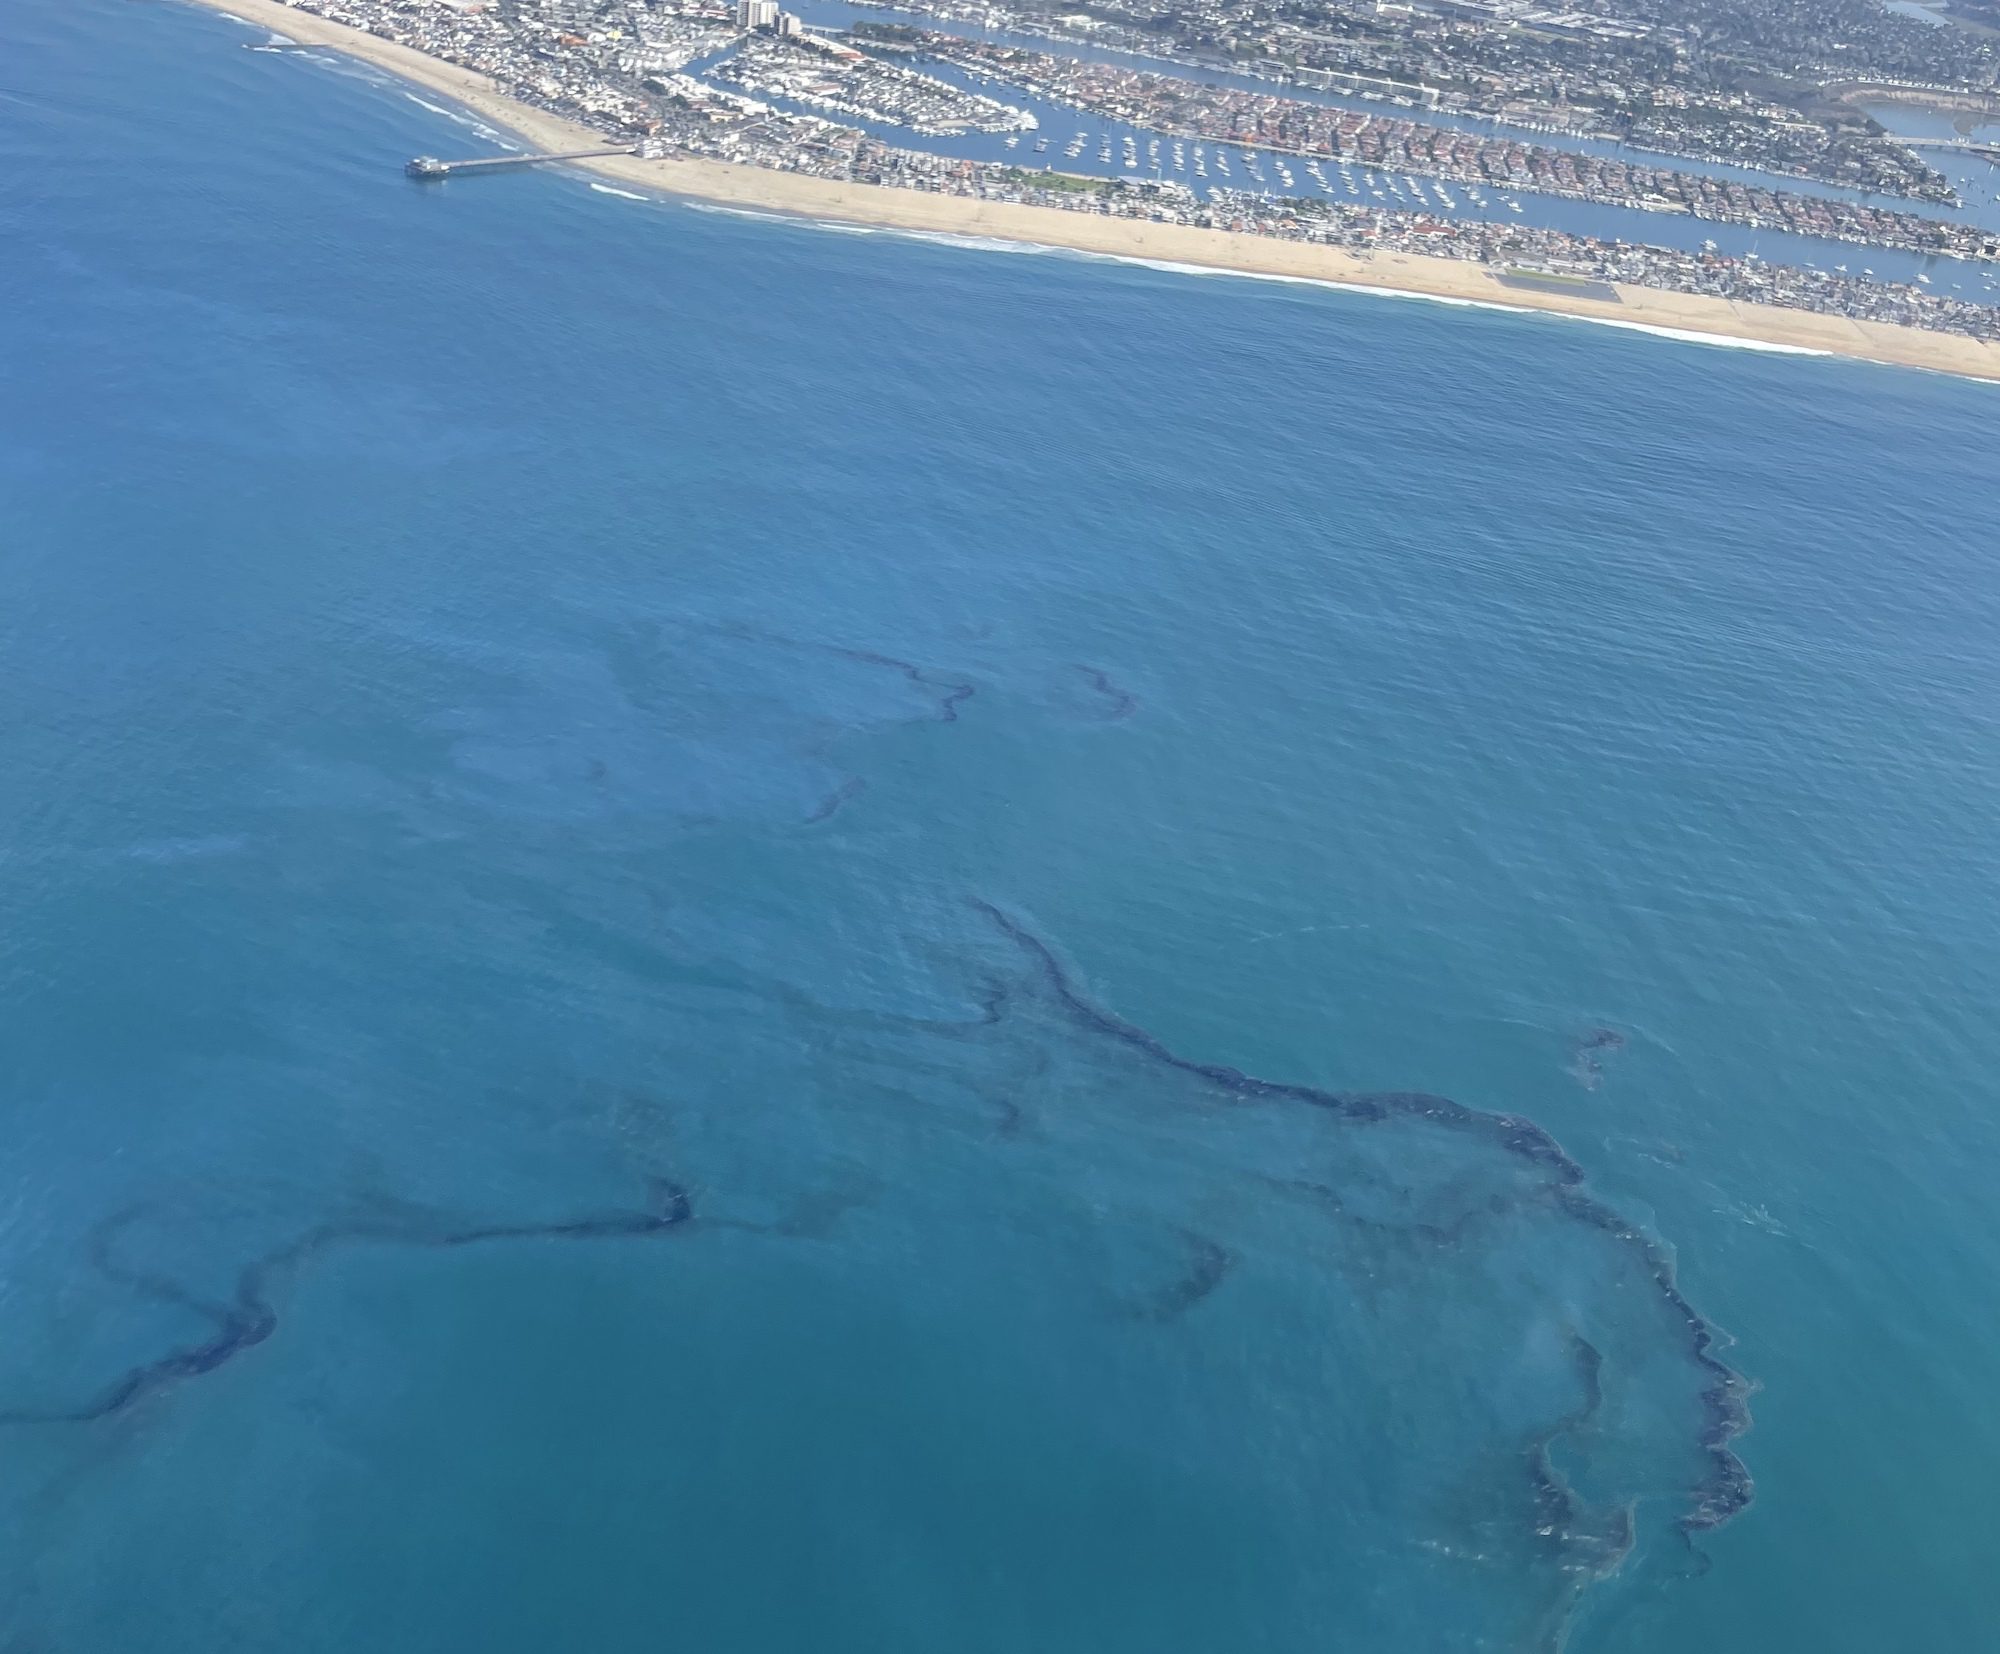 Officials Looking Into Whether A Ship’s Anchor May Have Caused Pipeline Leak Off Southern California